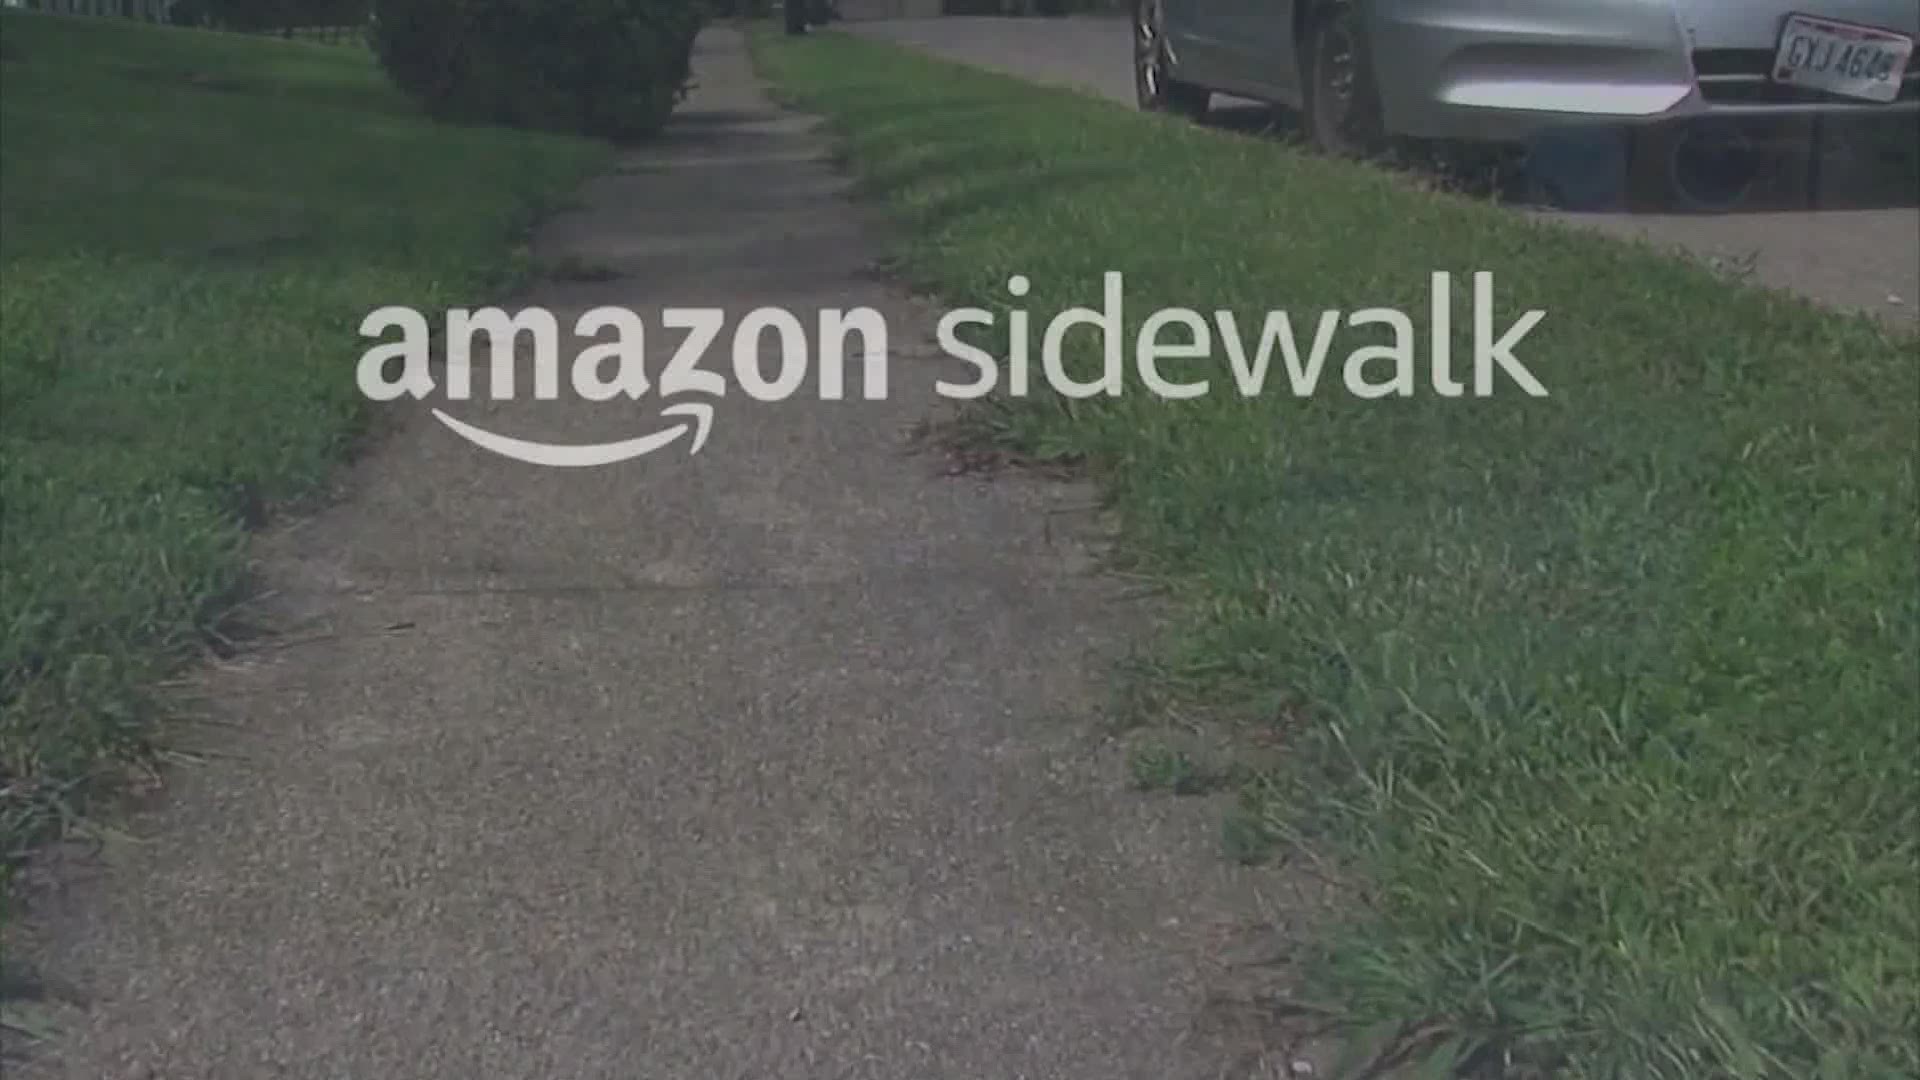 Sidewalk will be launched on June 8 in the United States, but here's what you can do if you don't want to take part in the program.